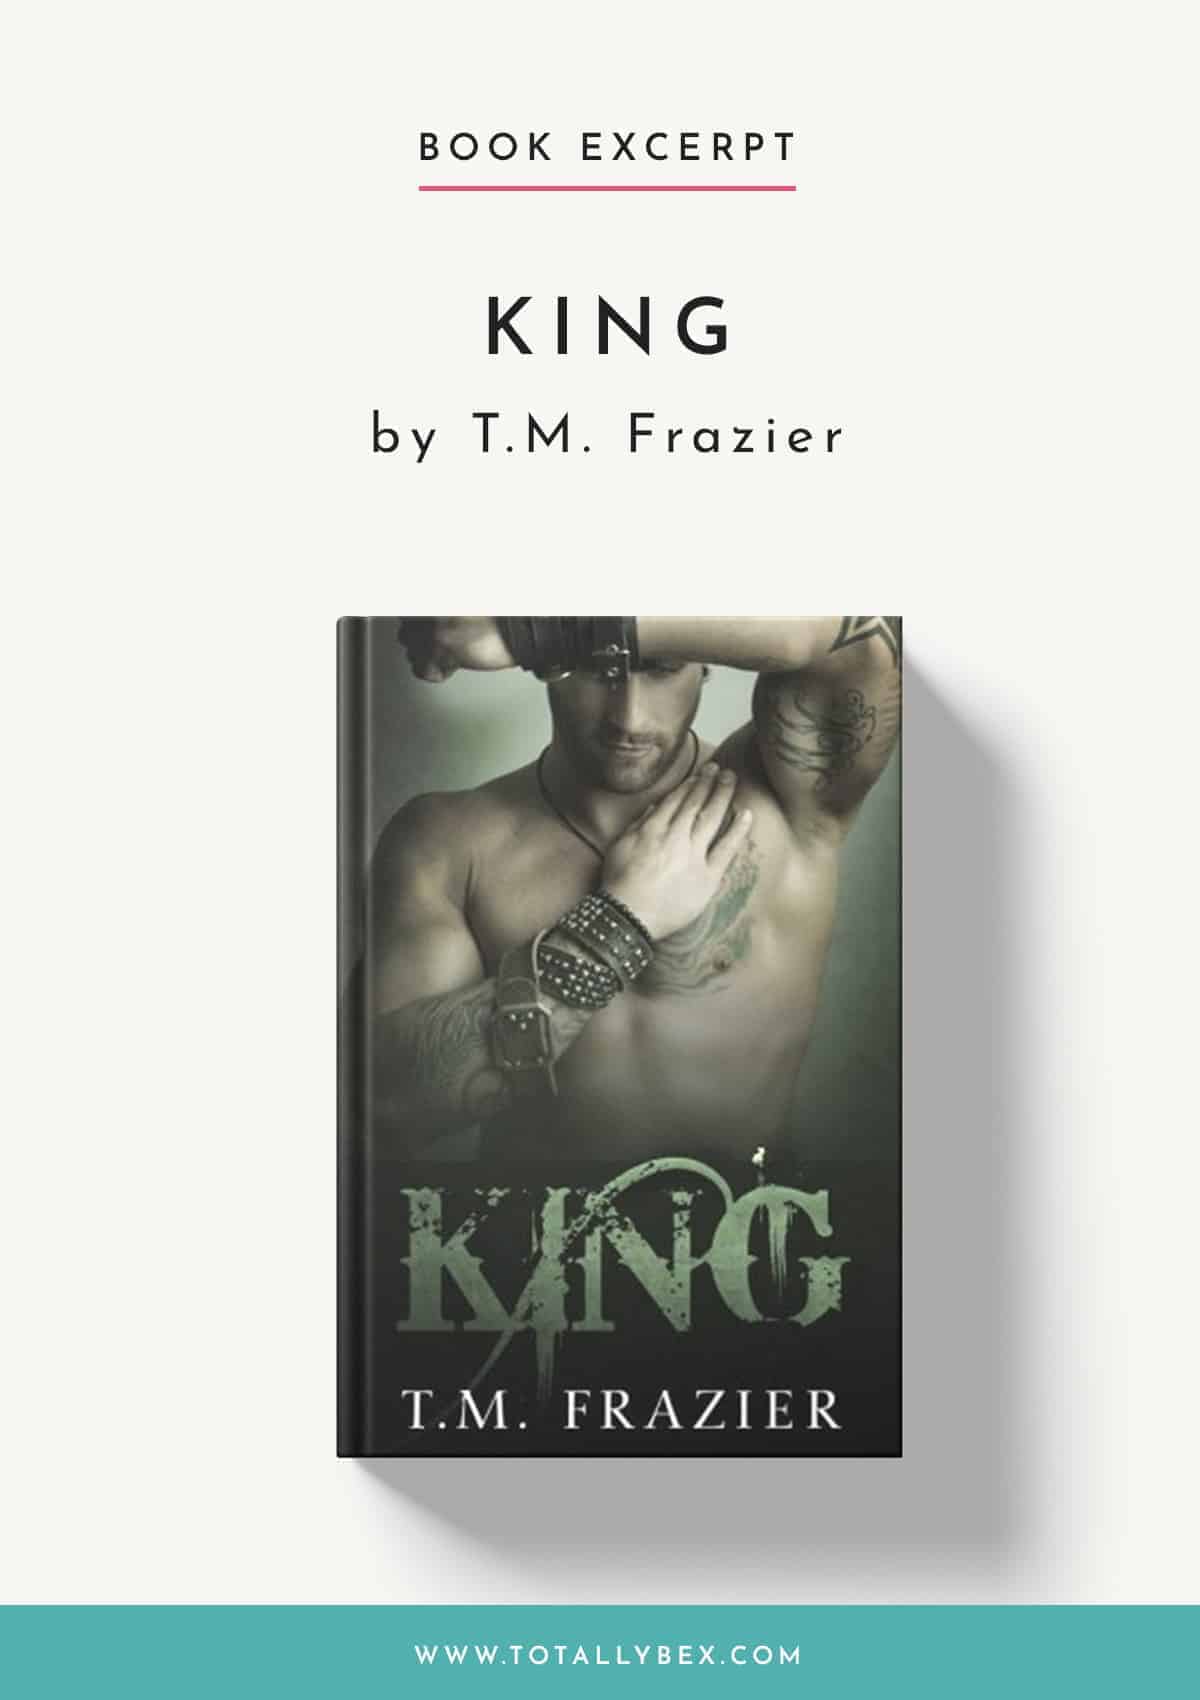 King by T M Frazier-Book Excerpt